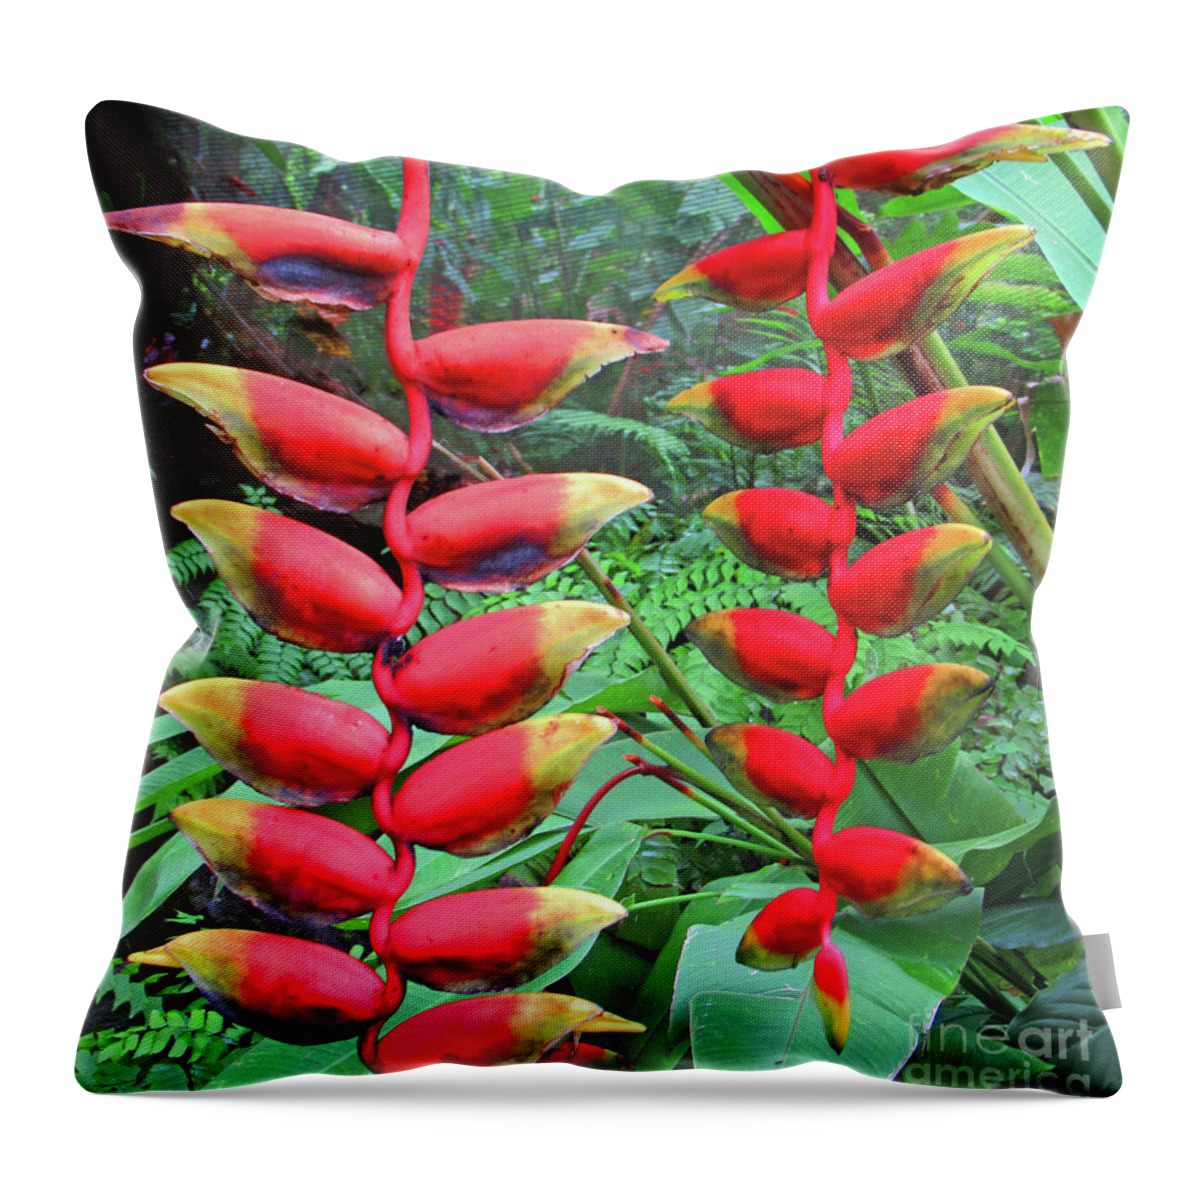 Heliconia Throw Pillow featuring the photograph Fiji Heliconia by Randall Weidner